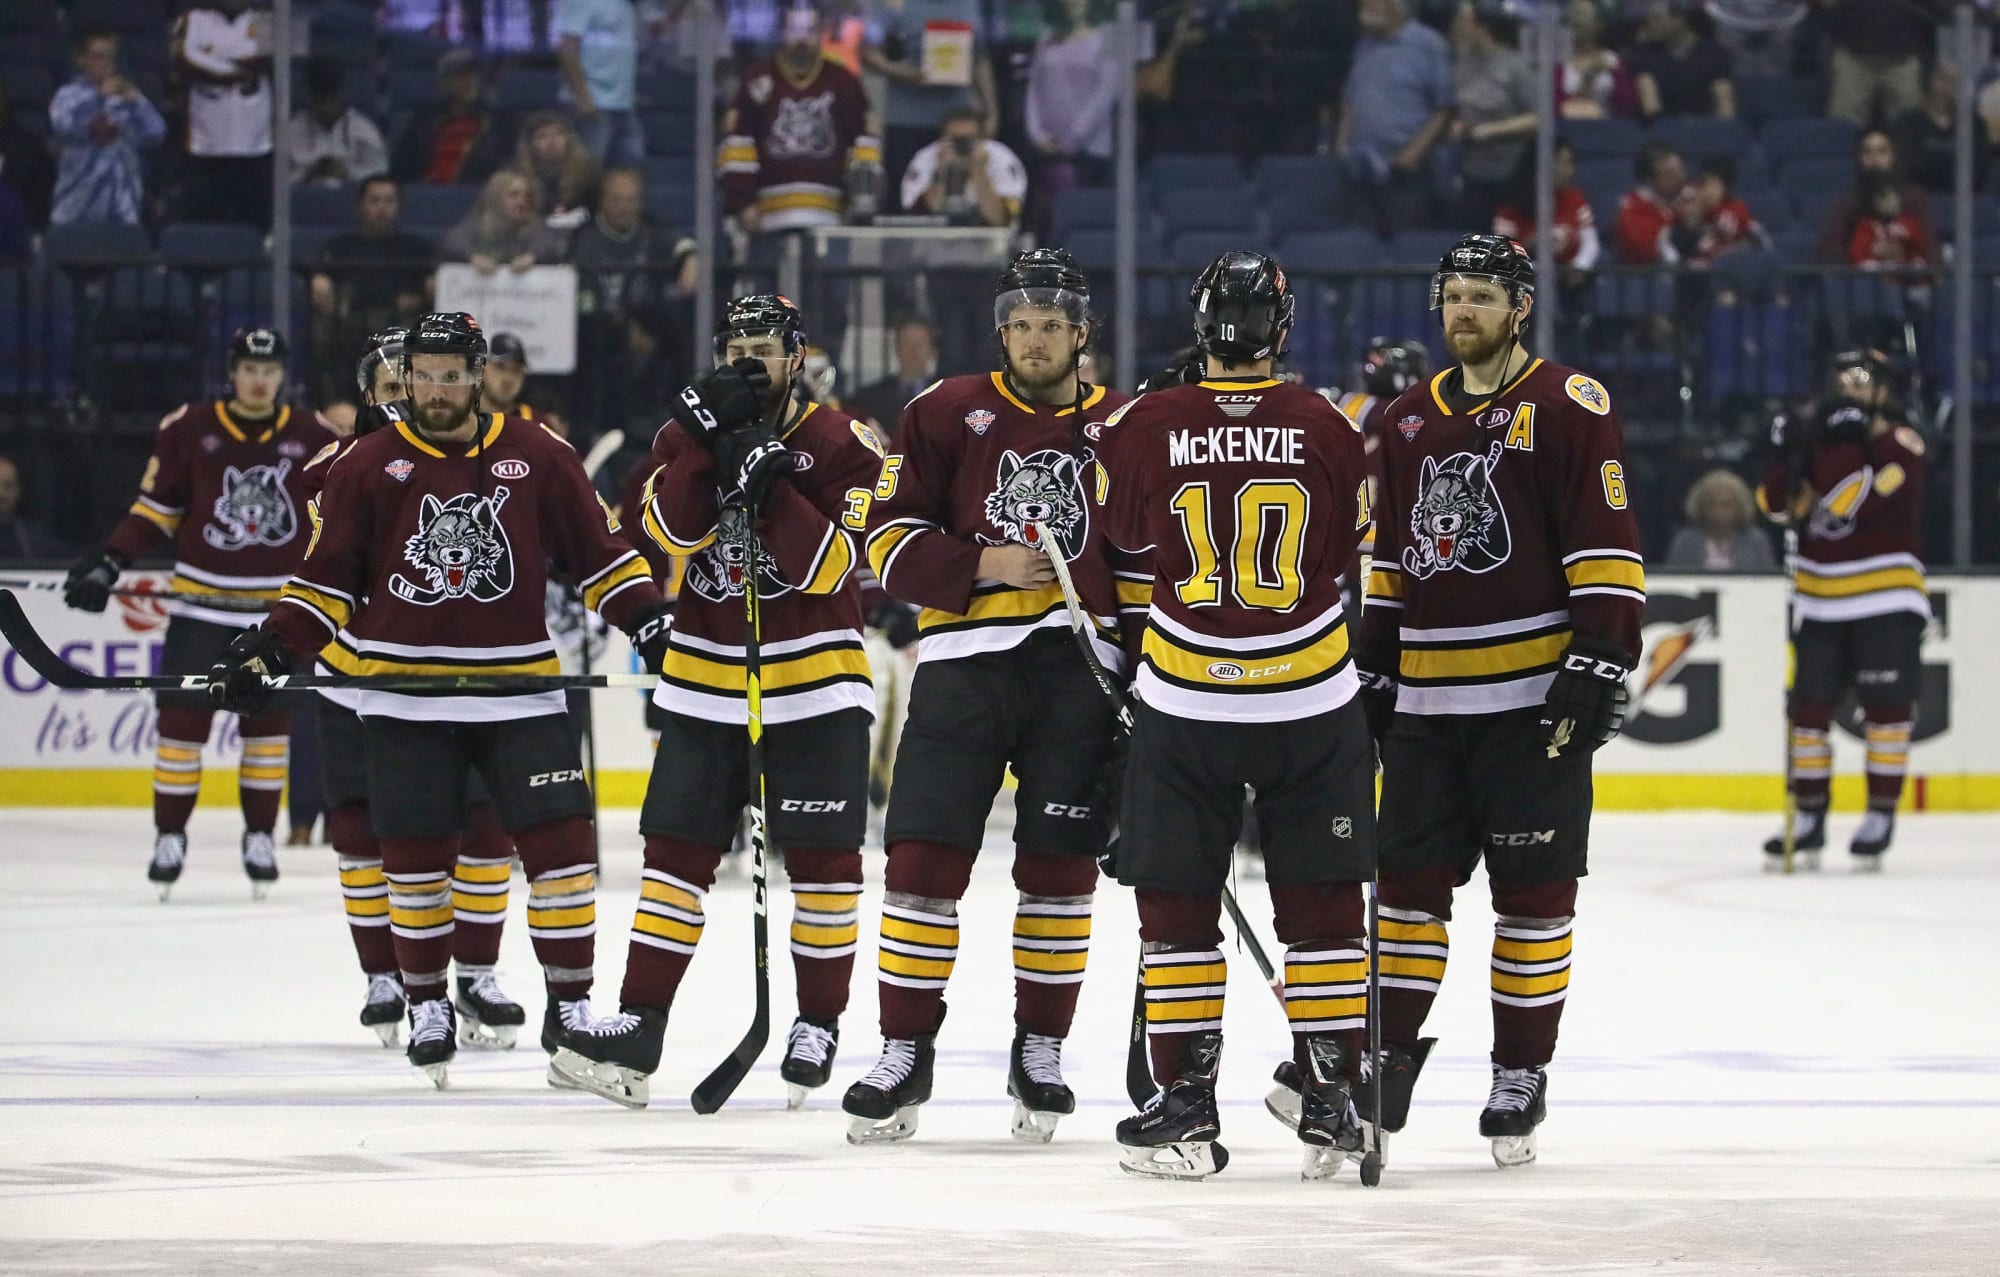 Chicago Wolves - YOUR CHICAGO WOLVES ARE CALDER CUP CHAMPIONS.